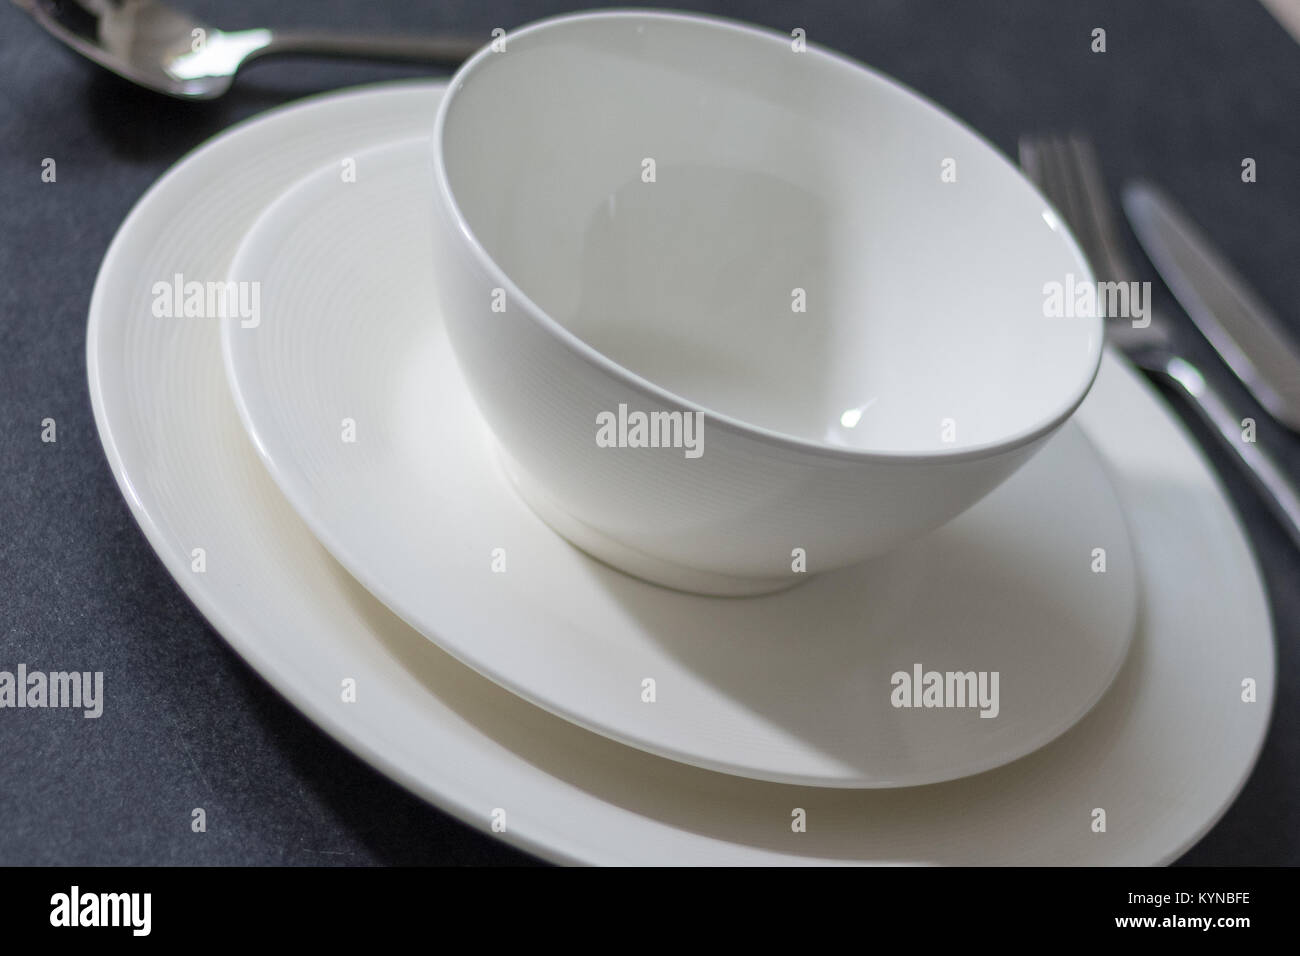 Table setting with dinner plate empty round white plate on dark background with cutlery Stock Photo